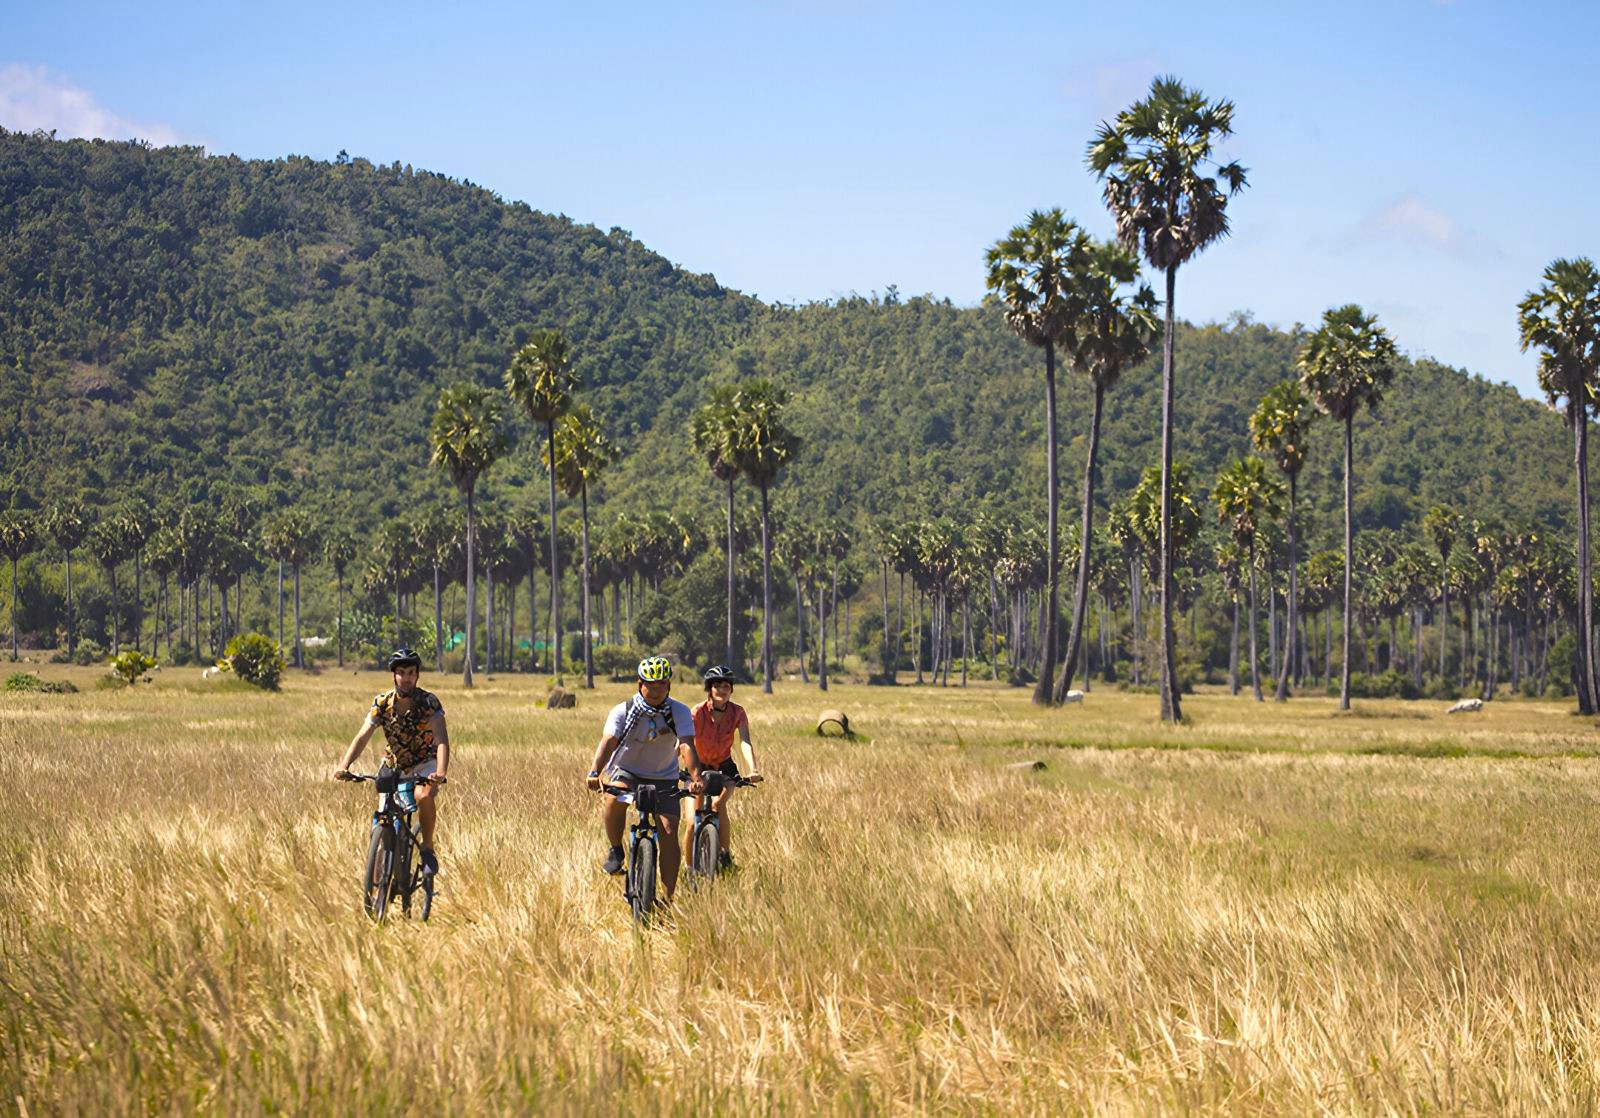 Cycling excursion from the Aqua Mekong river cruise in Vietnam